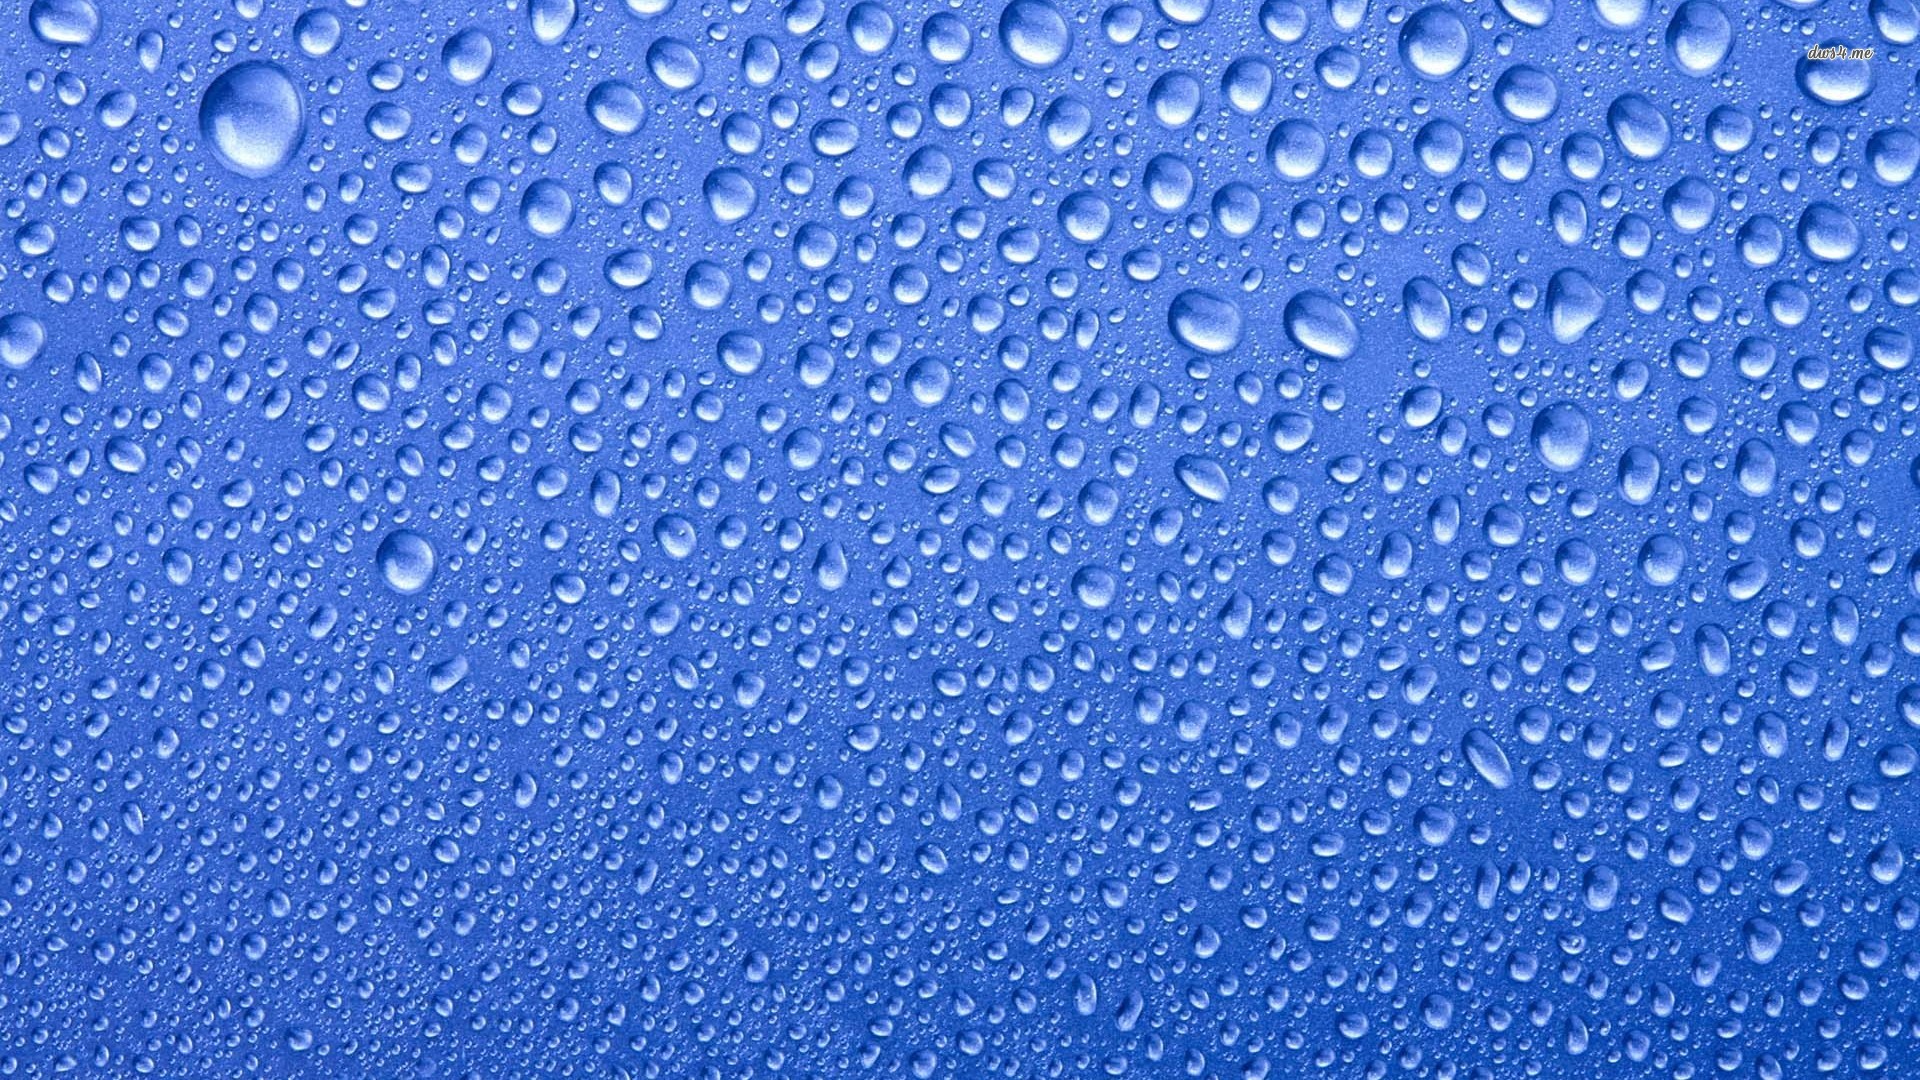 Water drops wallpaper   Abstract wallpapers   13529